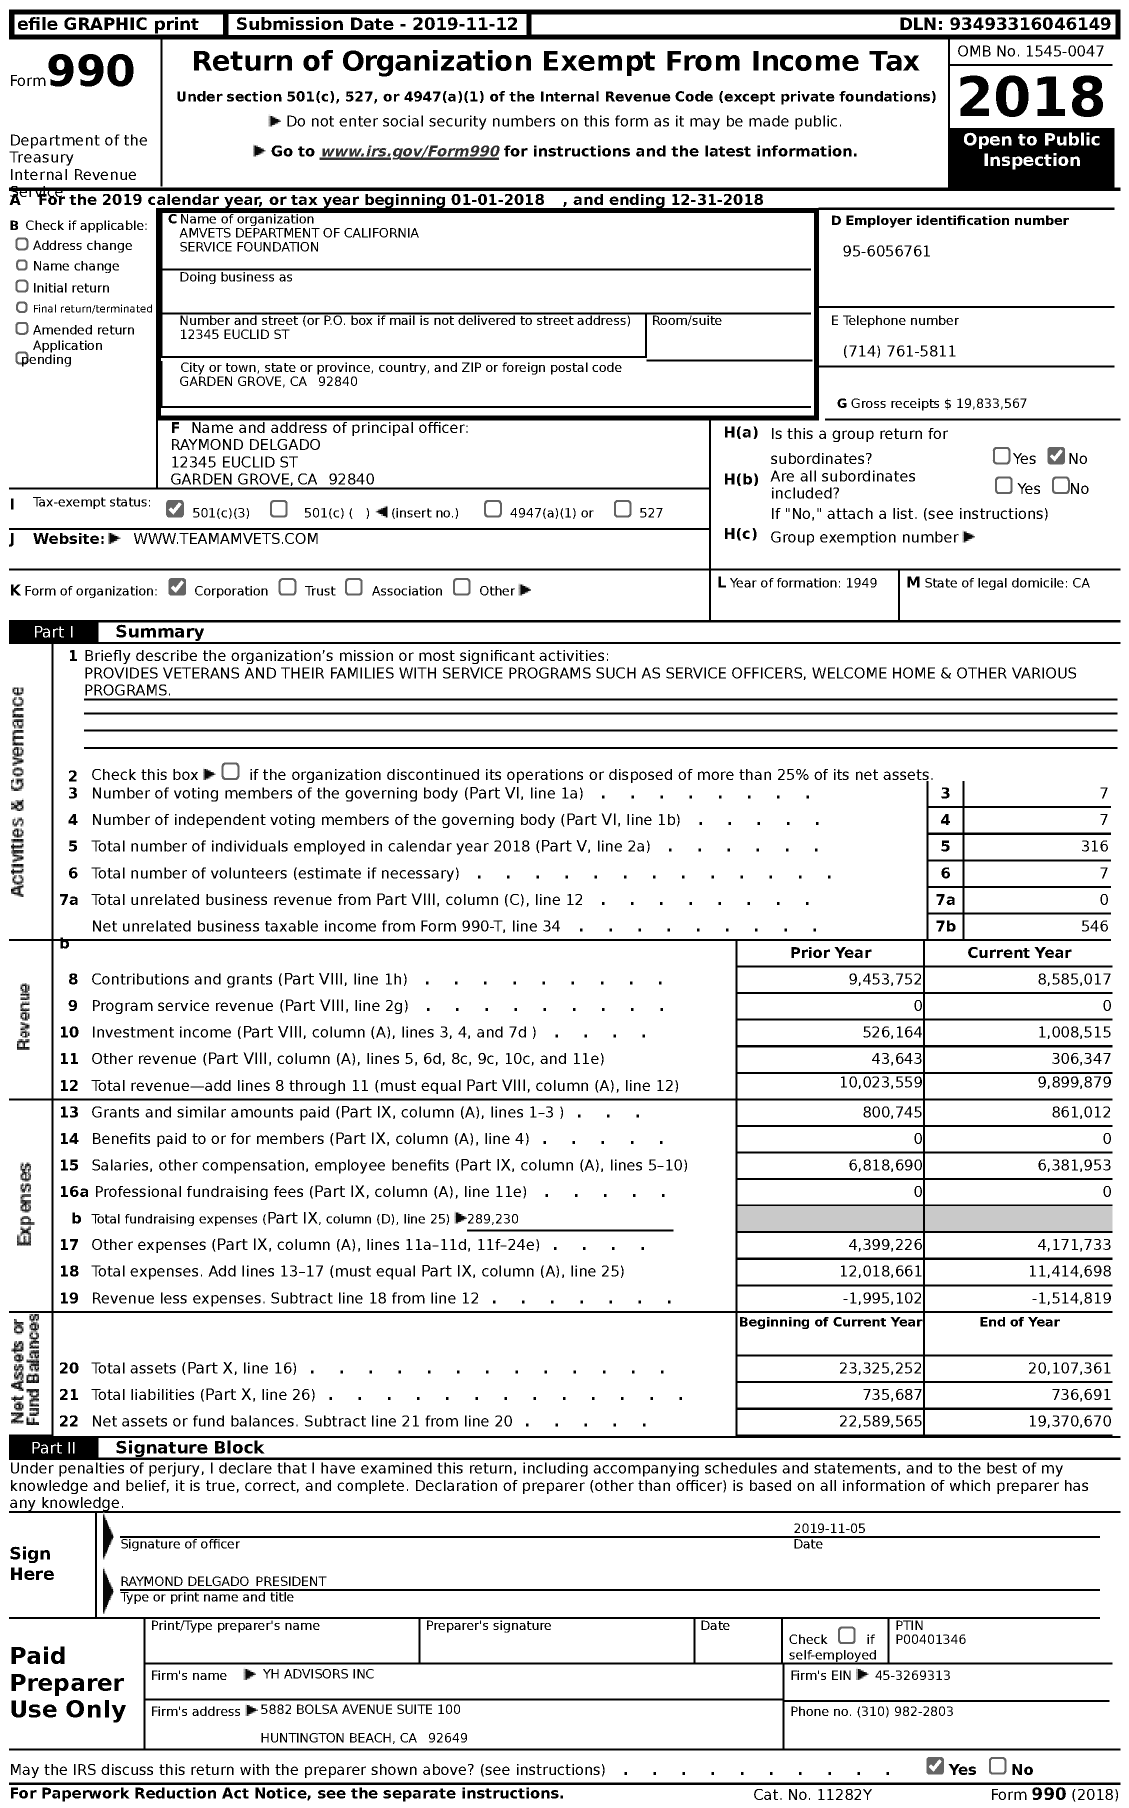 Image of first page of 2018 Form 990 for Amvets Department of California Service Foundation